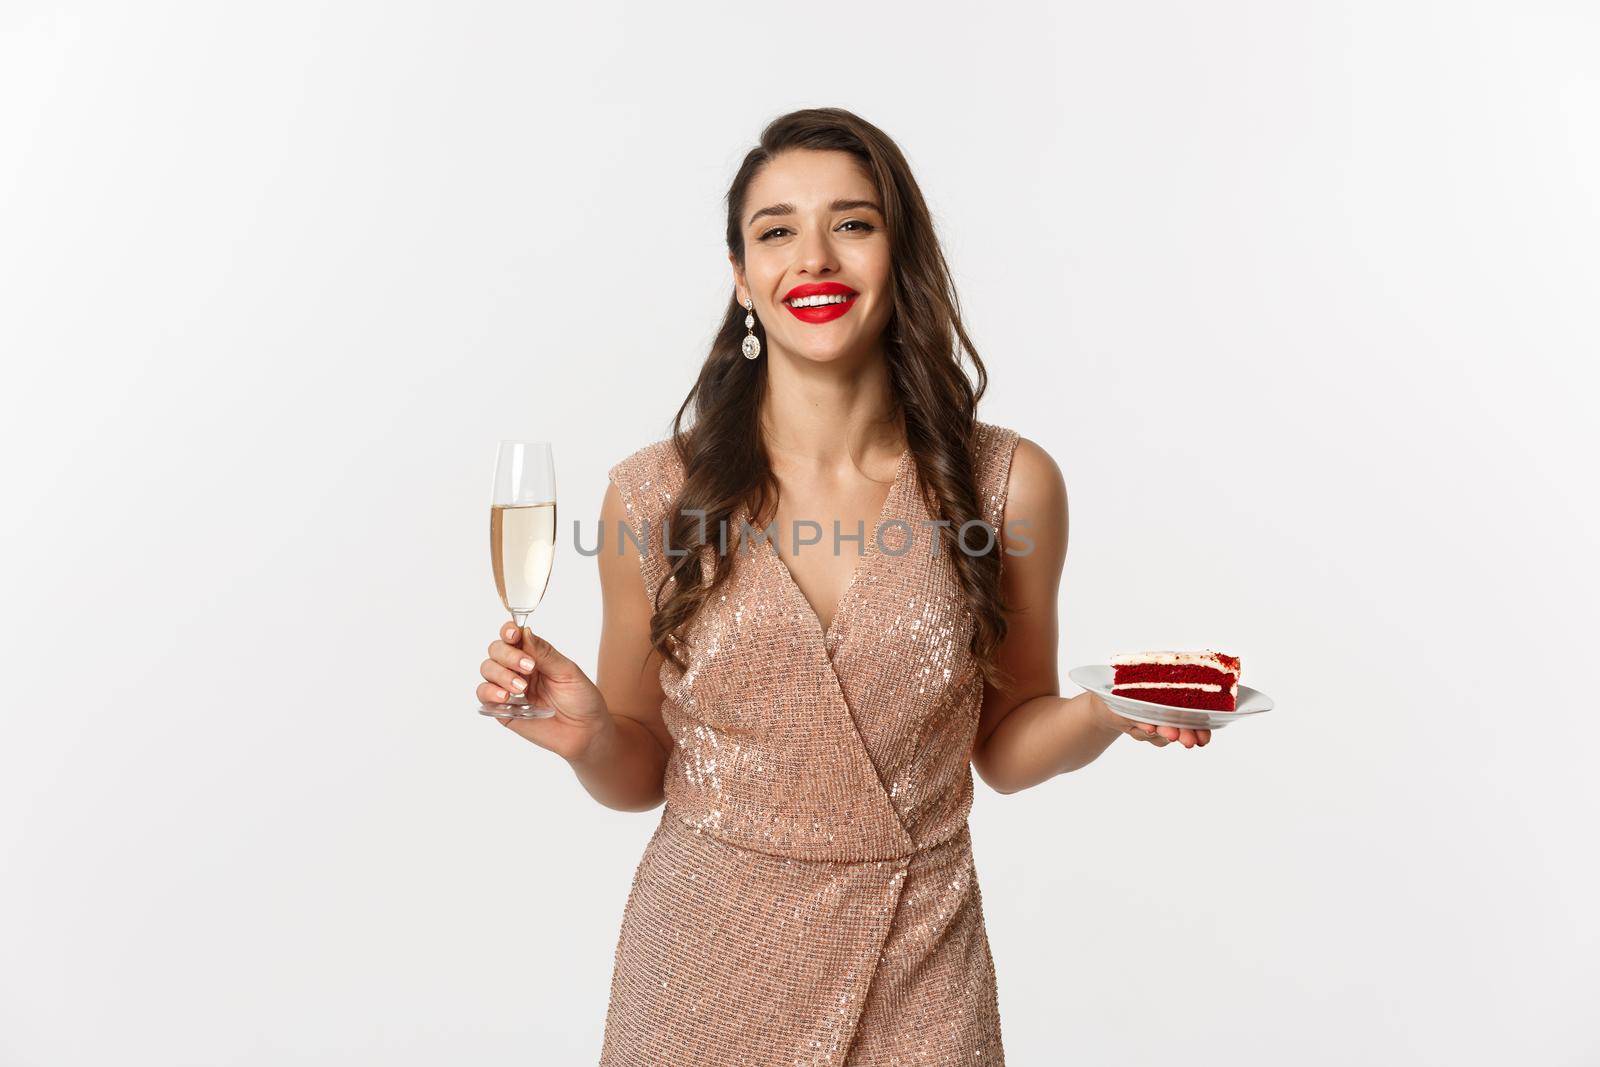 Party and celebration concept. Elegant woman with red lips, glamour dress, drinking champagne and eating cake, standing over white background.